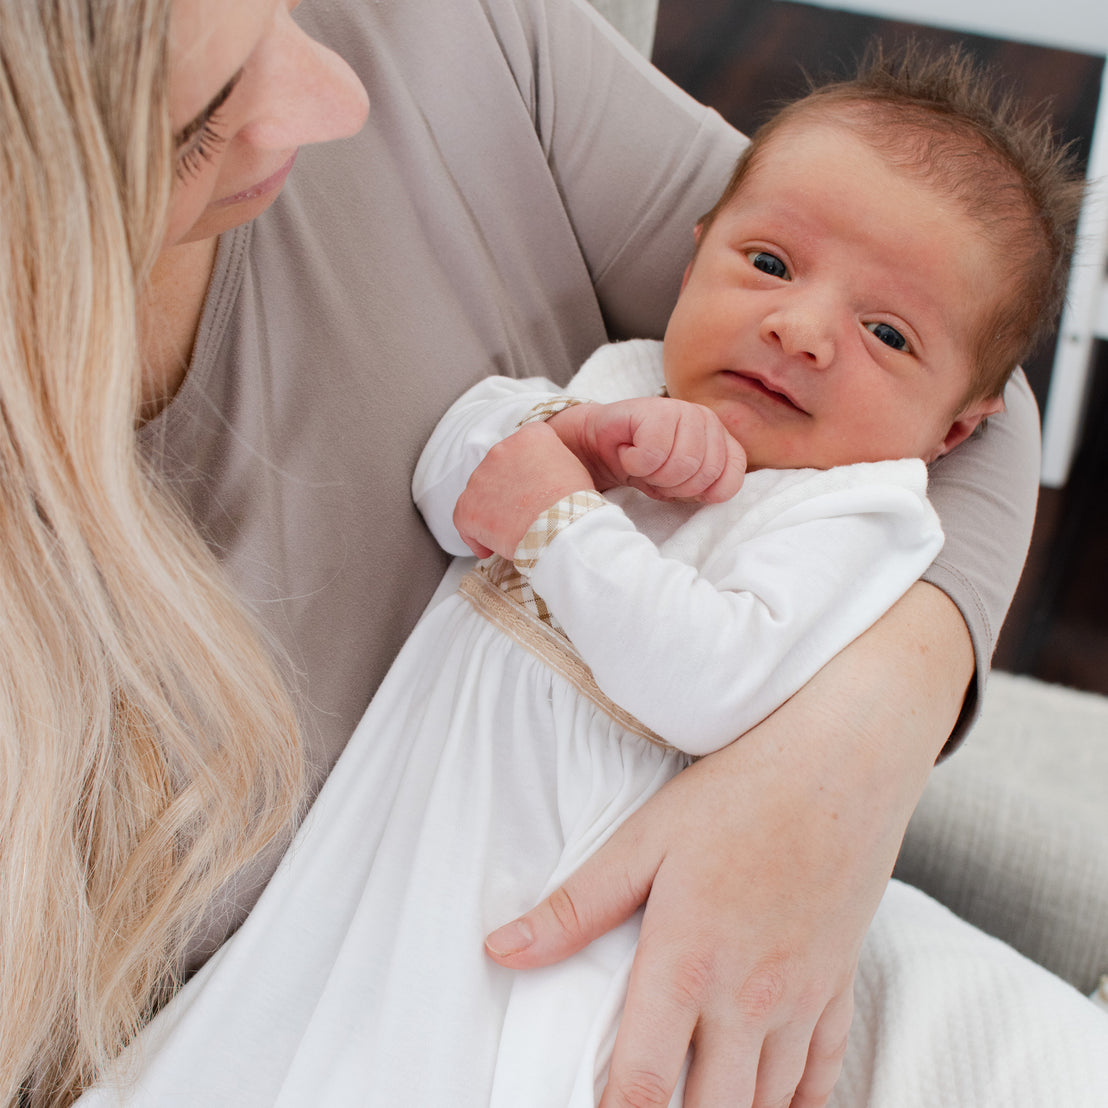 A mother gently holds her newborn baby, who is looking directly at the camera. The baby is dressed in a white Dylan Layette outfit with a bow, and the mother is smiling lovingly down at them.